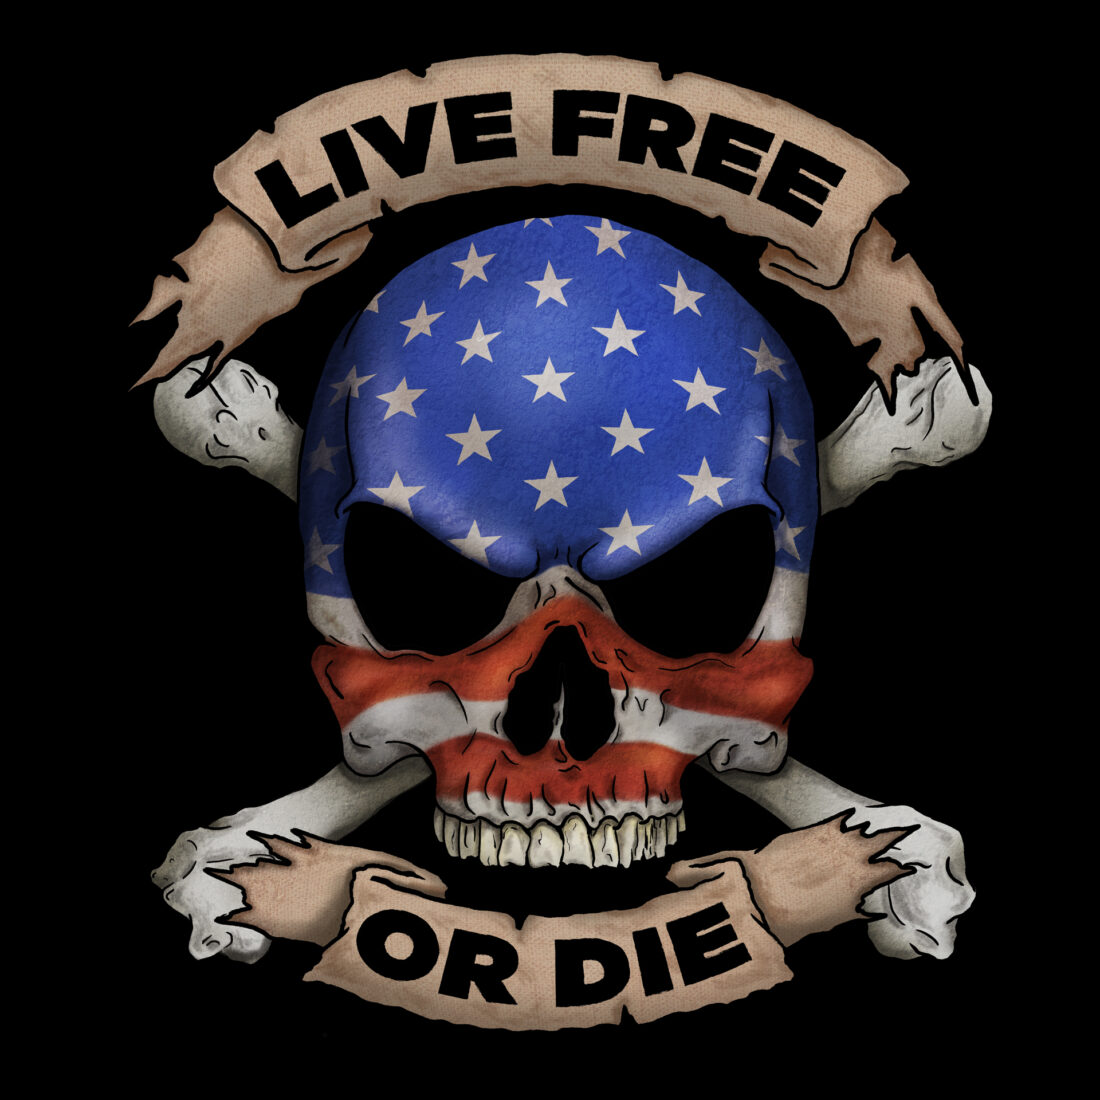 Live Free or Die” is the official motto of the U.S. state of New Hampshire